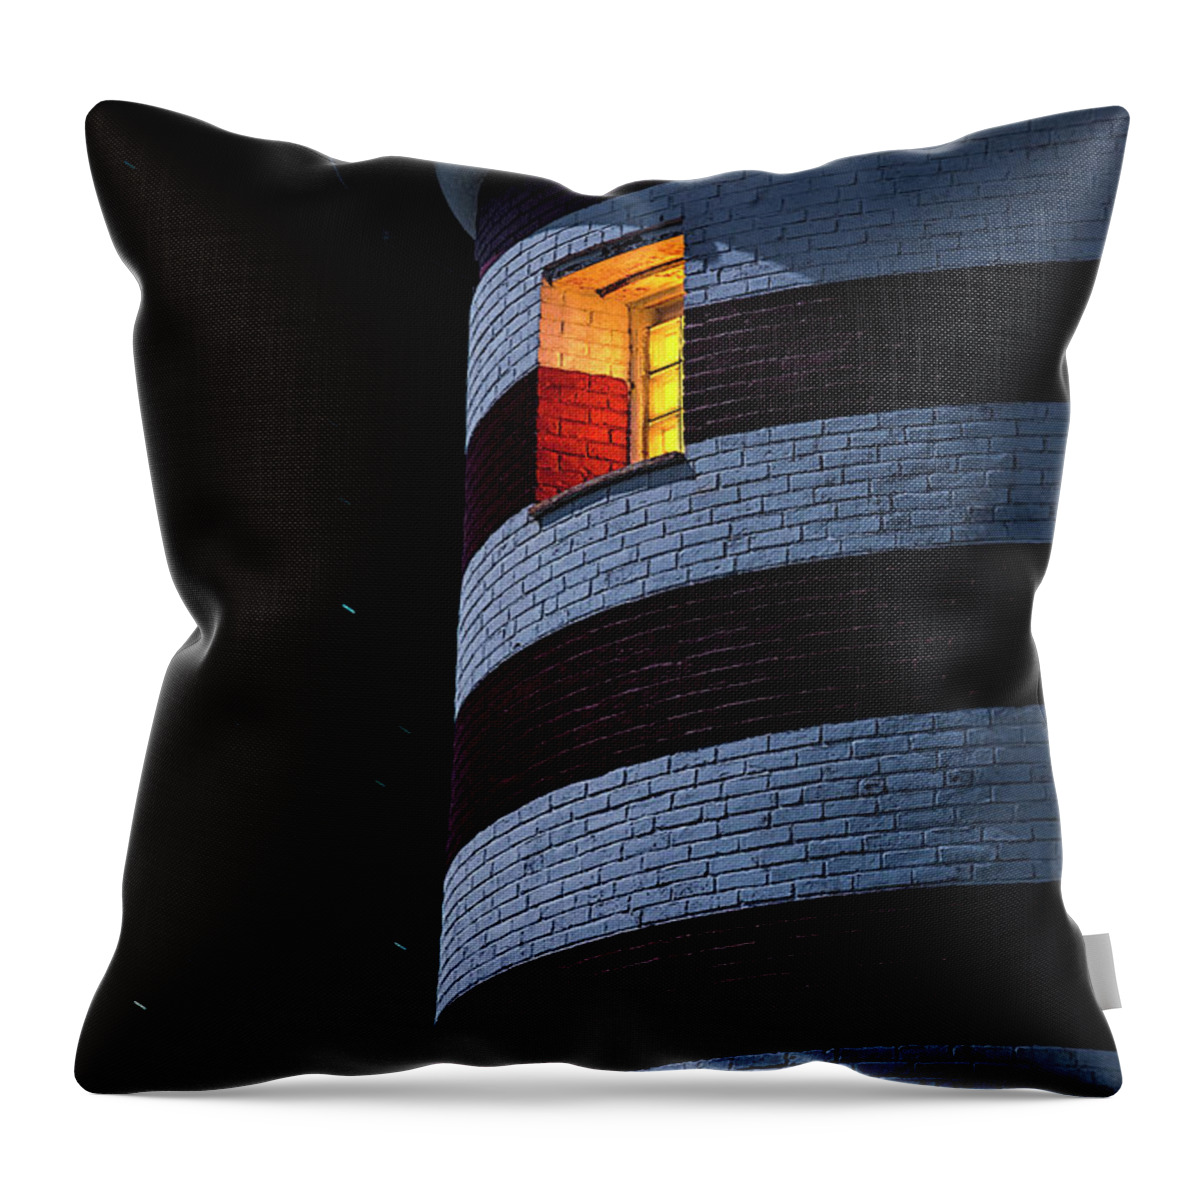 Lighthouse Throw Pillow featuring the photograph Light From Within by Marty Saccone